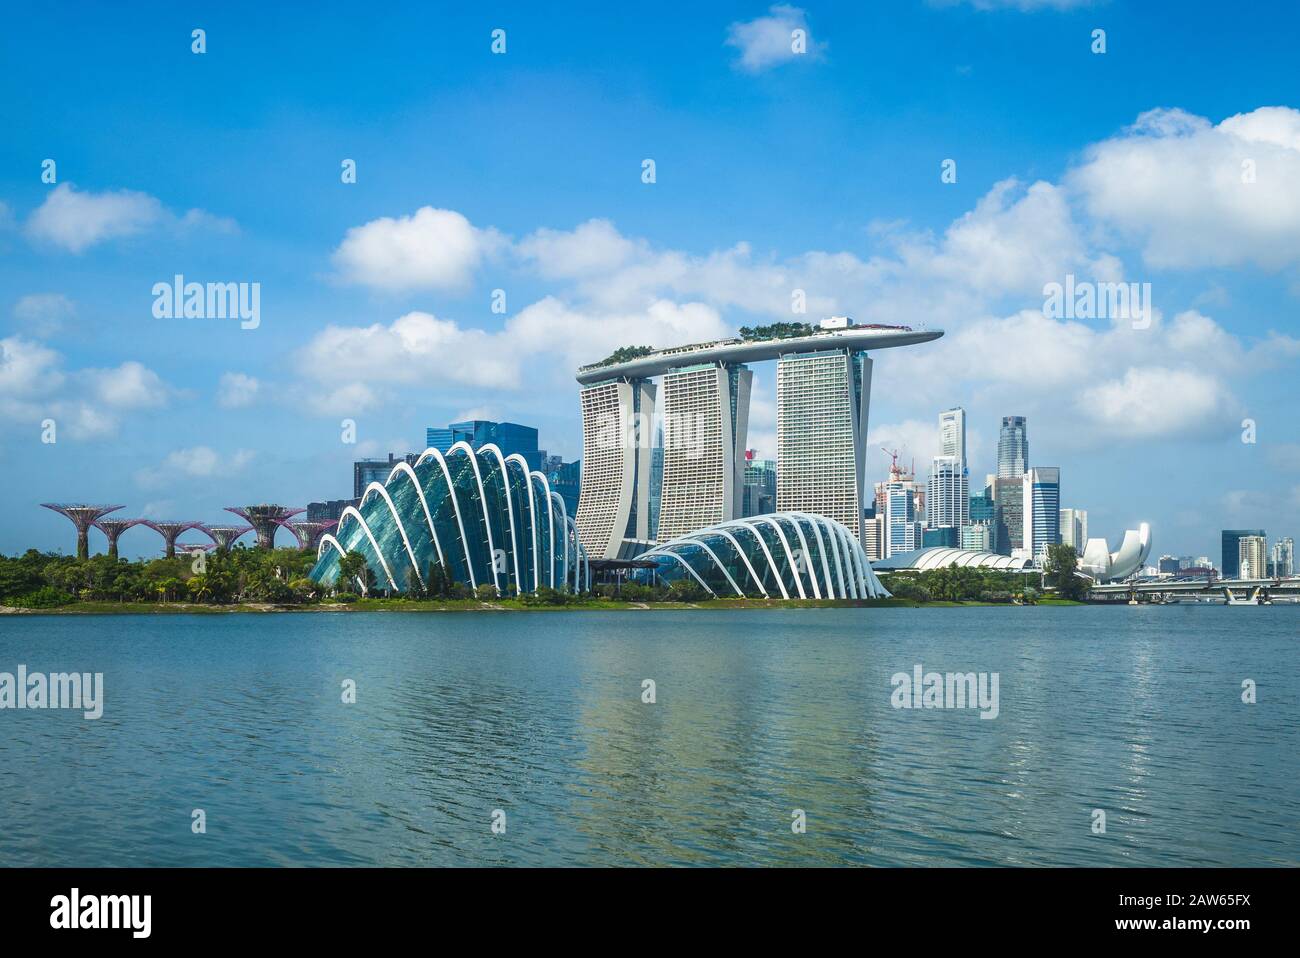 singapore - February 3, 2020: skyline of singapore at the marina bay with iconic building such as supertree, marina bay sands, artscience museum. Stock Photo